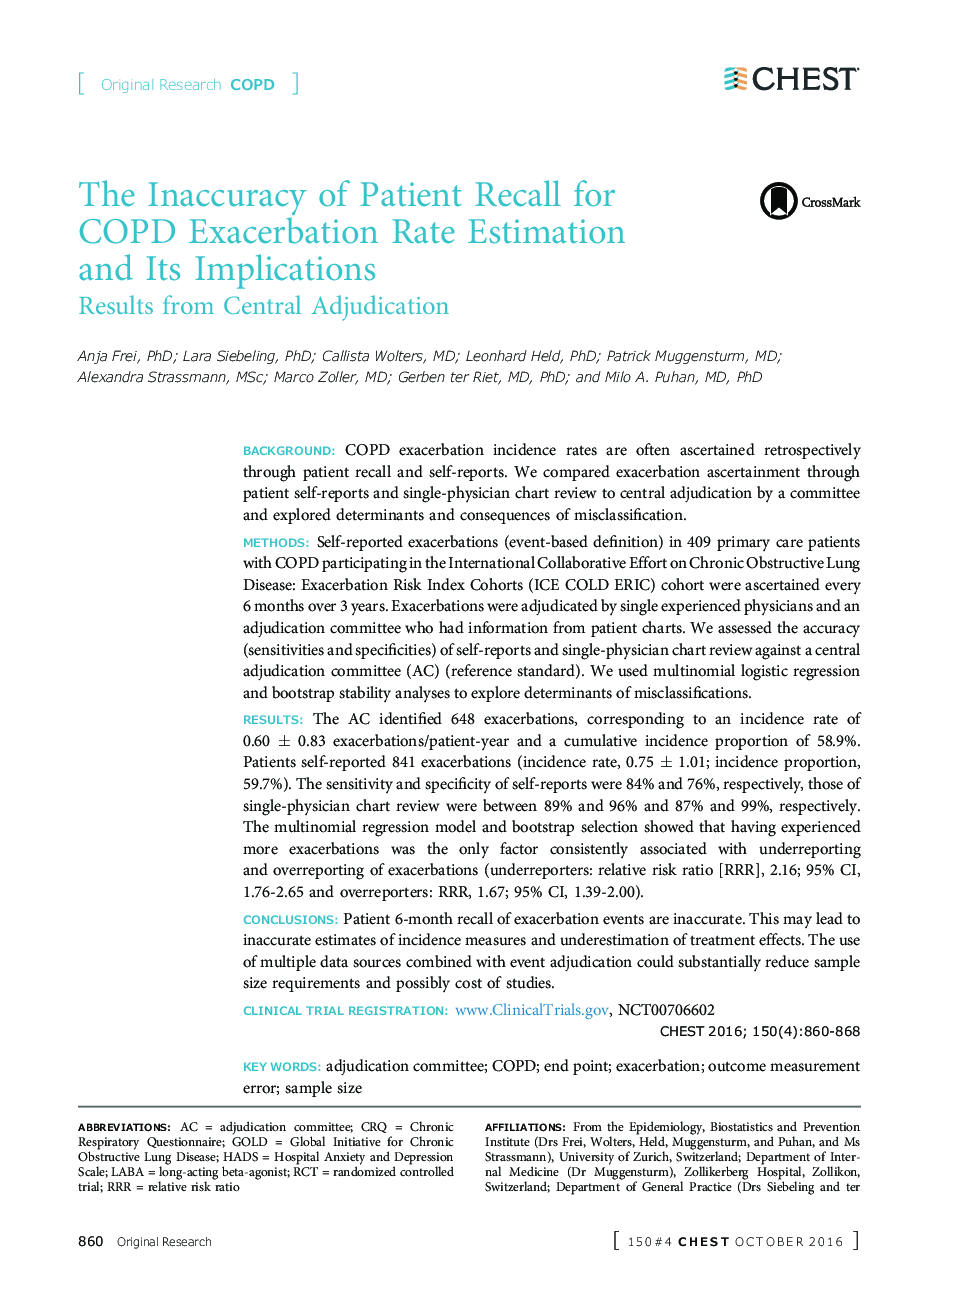 The Inaccuracy of Patient Recall for COPD Exacerbation Rate Estimation and Its Implications